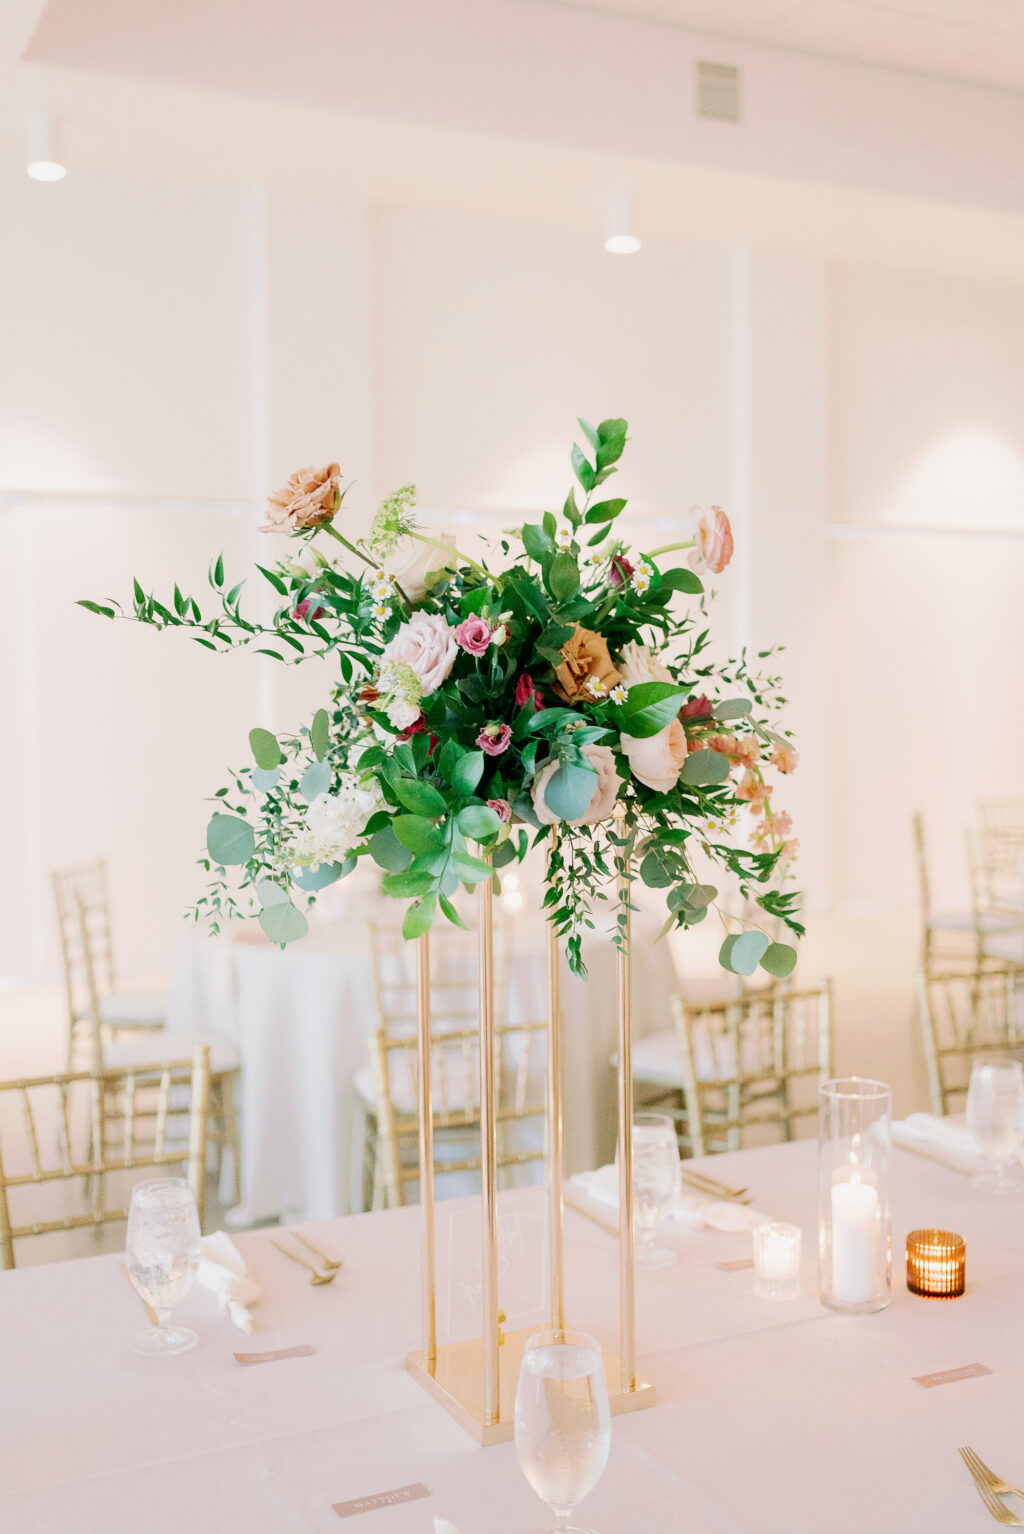 Tall Gold Flower Stand with Greenery and Roses Garden Wedding Reception Centerpiece Inspiration